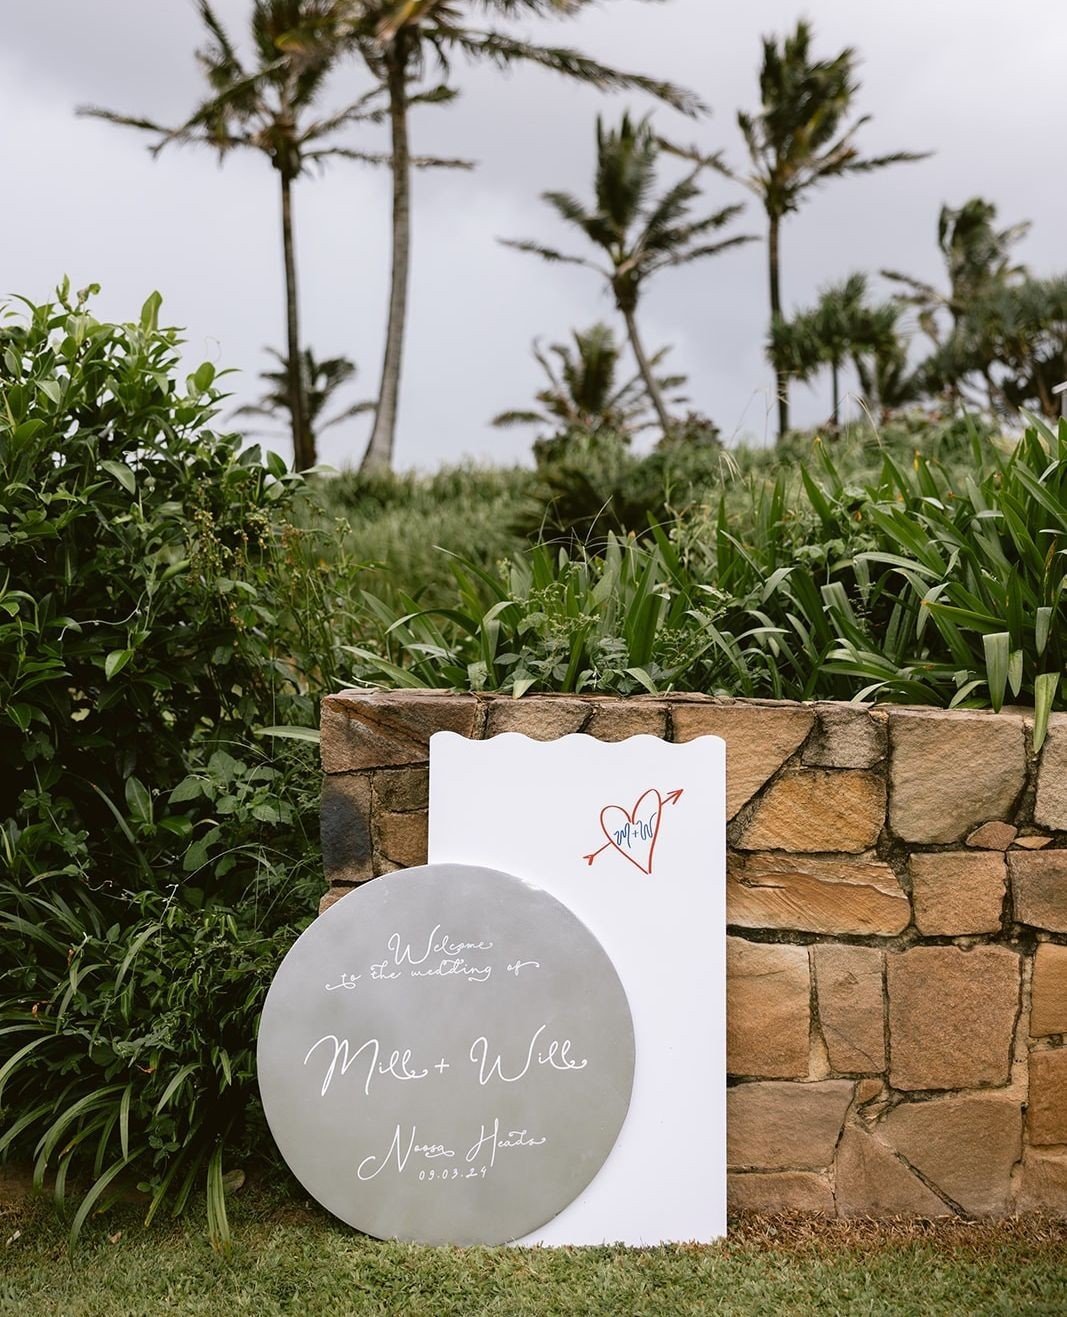 Fun, contemporary signage created for our gorgeous Millie &amp; Will...⁠
⁠
Photographer: @luminousmoments_⁠
Planner &amp; Stylist: @lovebirdweddings ⁠
⁠
⁠
⁠
⁠
⁠
⁠
⁠
⁠
⁠
⁠
⁠
#originalwedding #beautifulwedding #elegantwedding #weddinginspiration #weddi